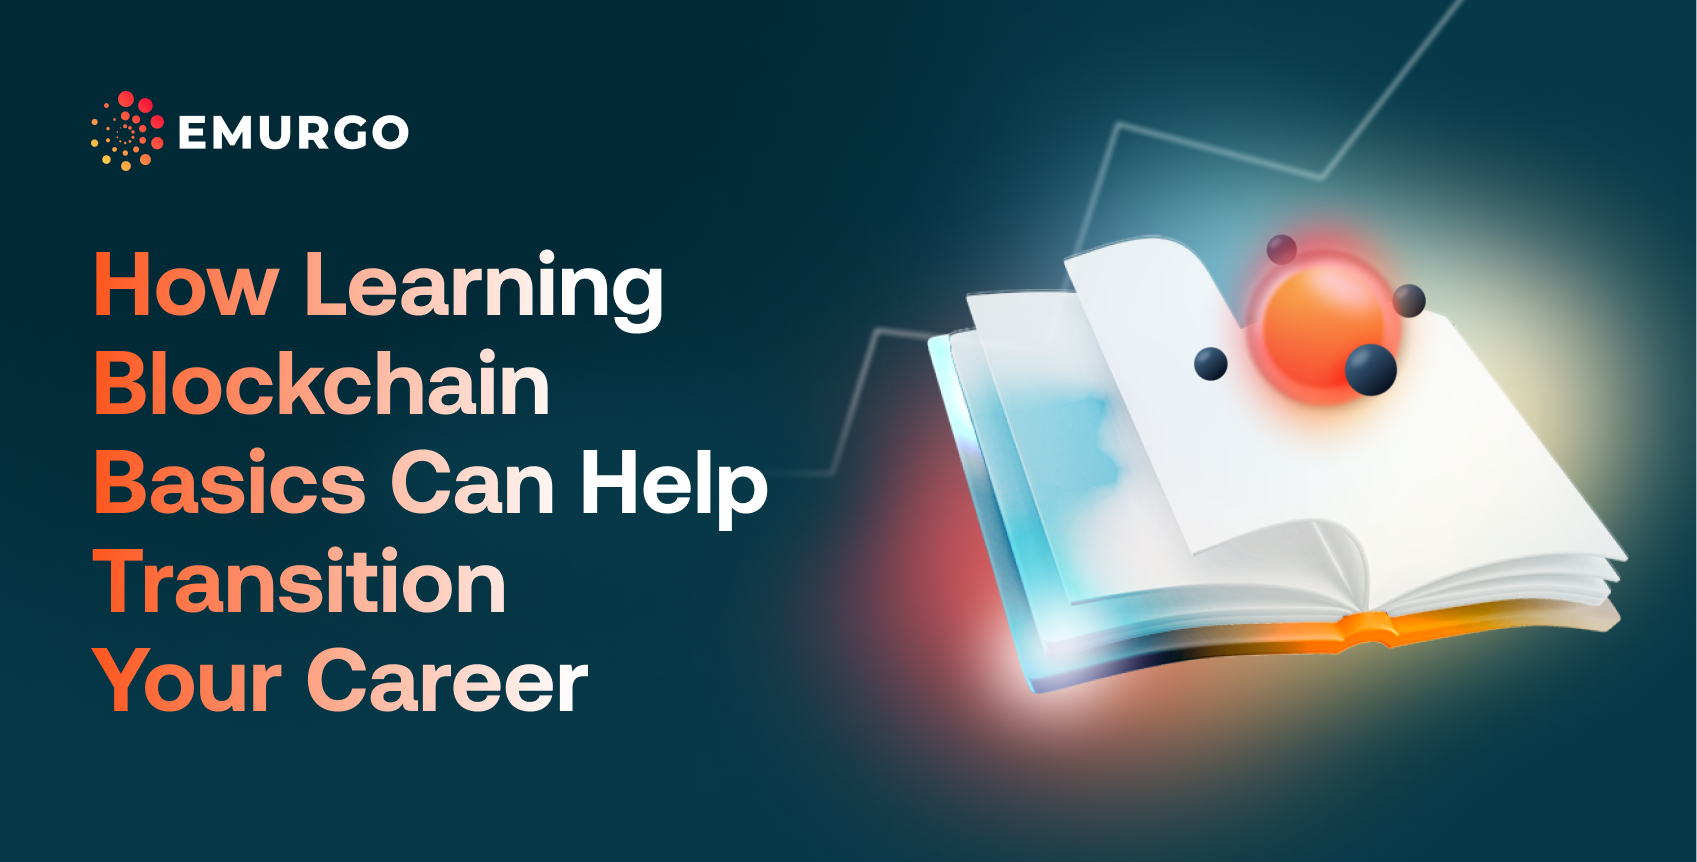 How Learning Blockchain Basics Can Help Transition Your Career